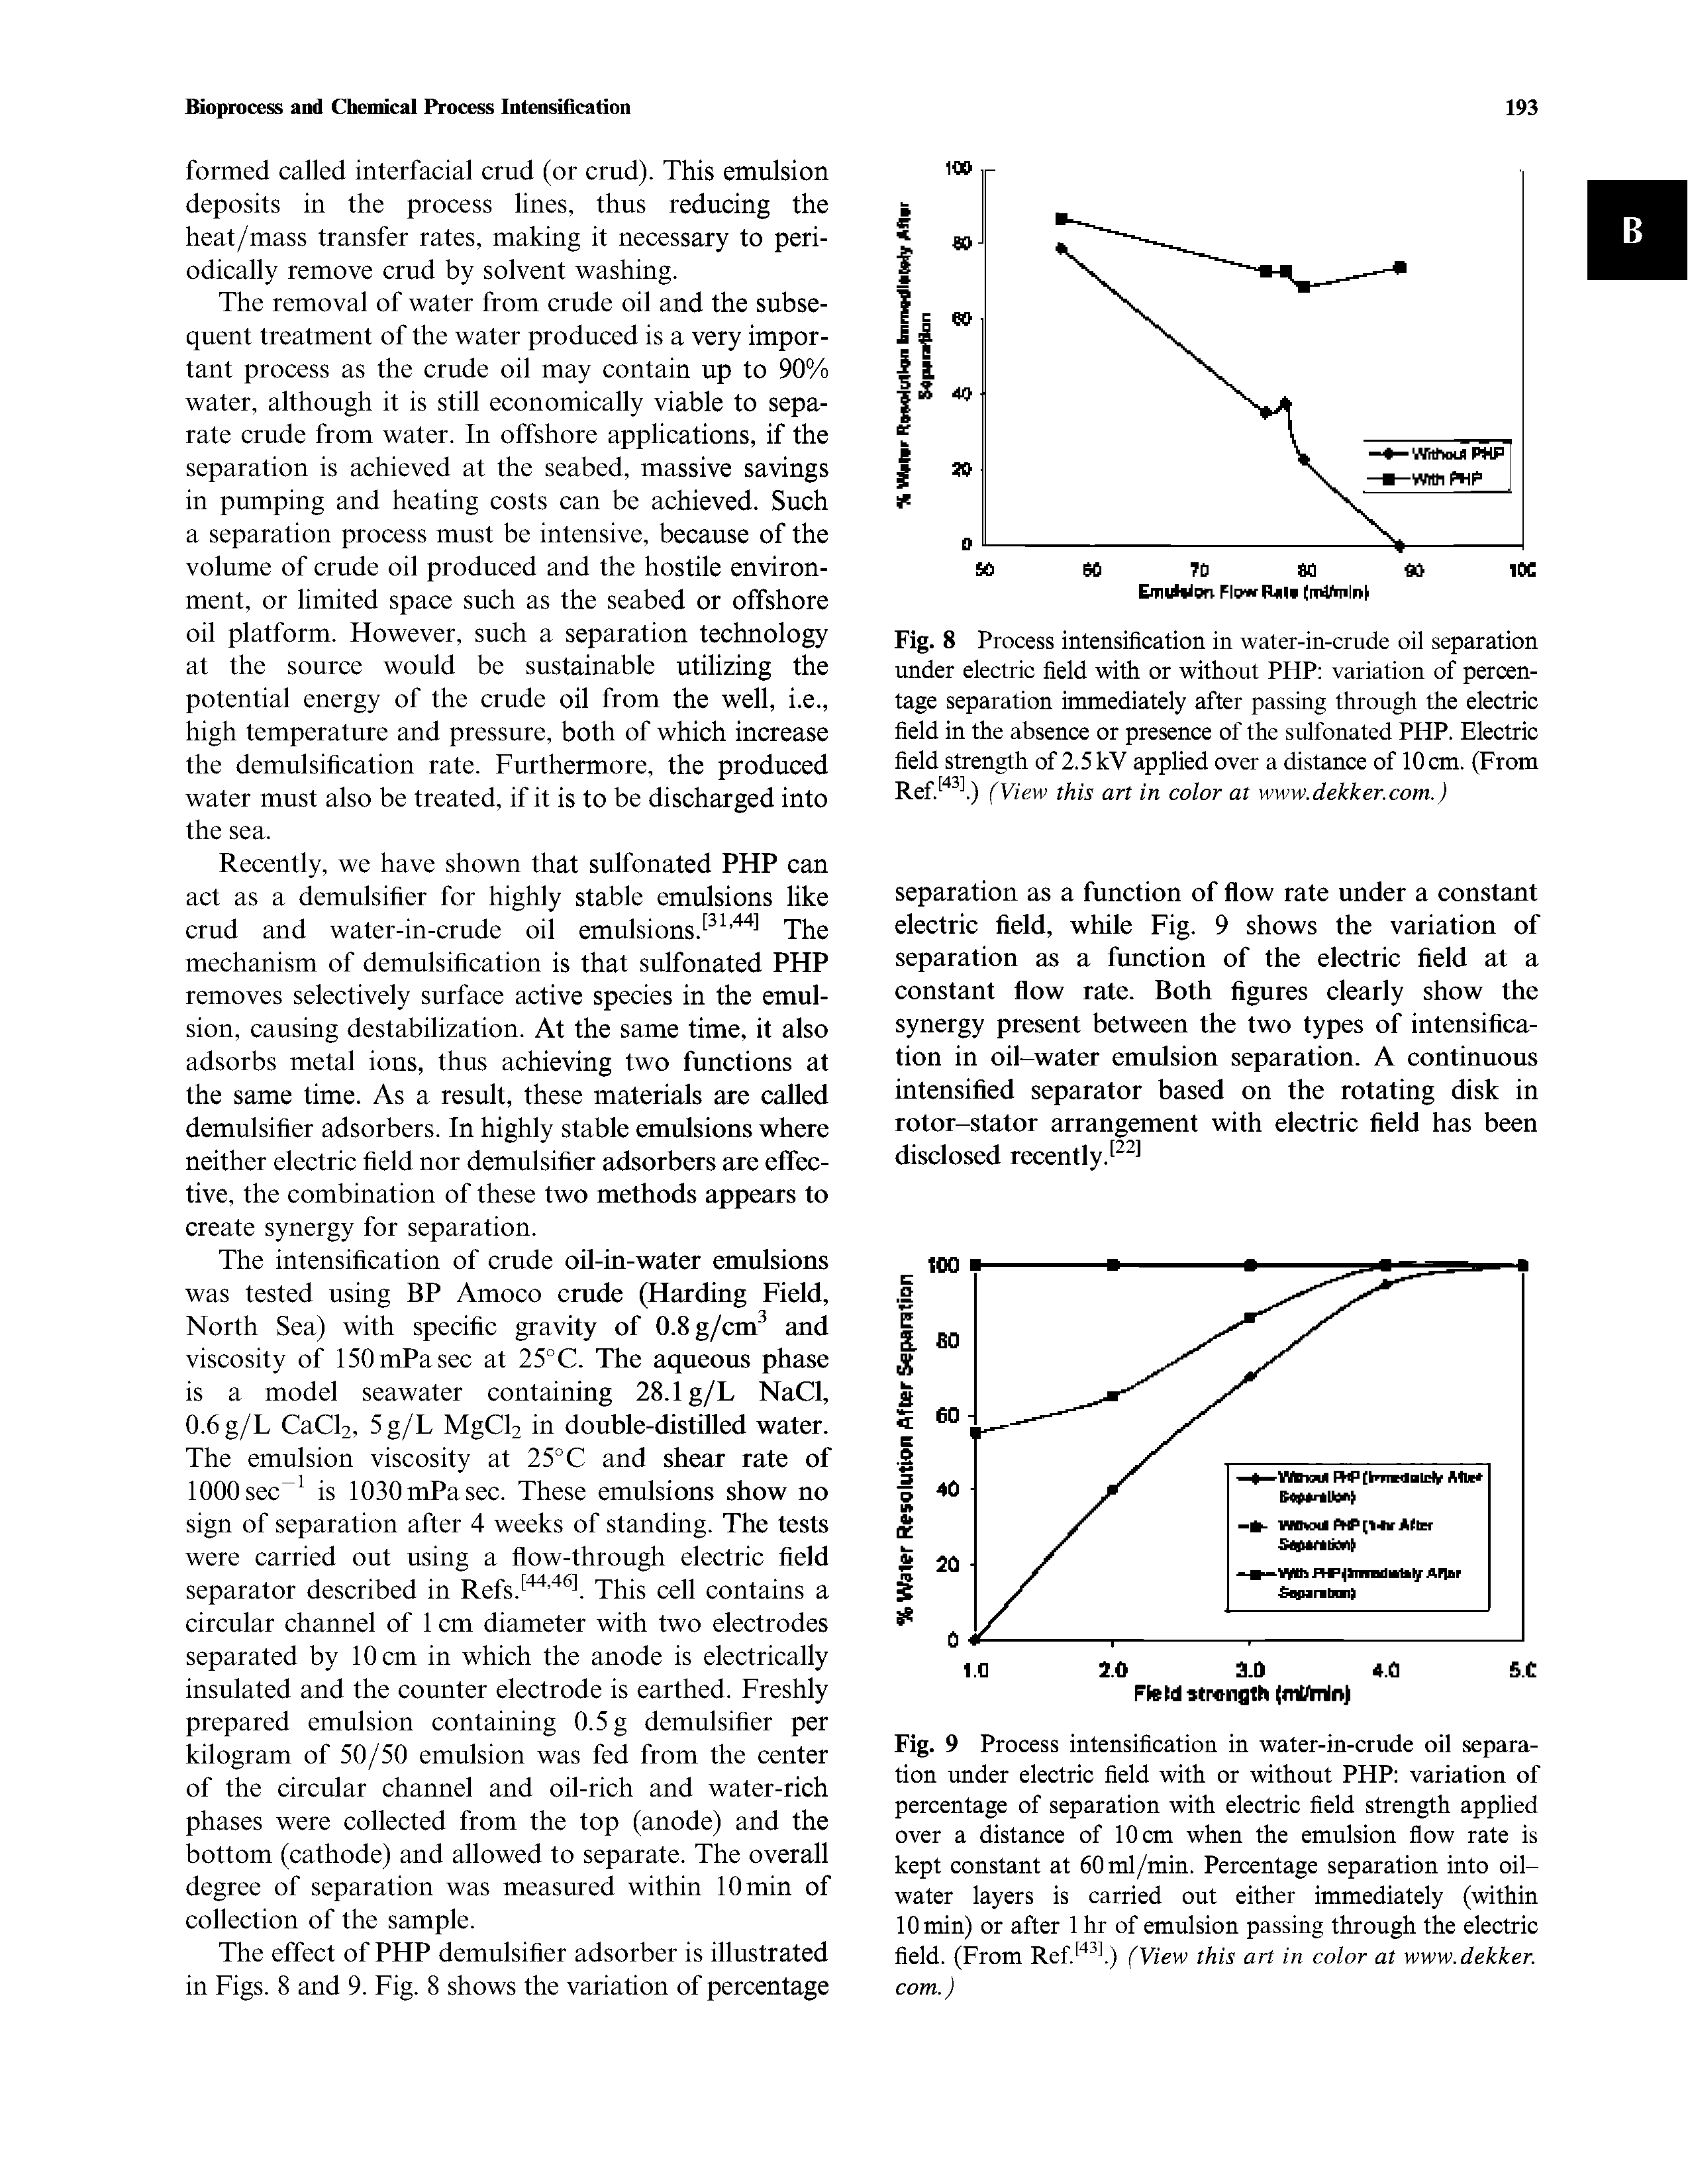 Fig. 9 Process intensification in water-in-crude oil separation under electric field with or without PHP variation of percentage of separation with electric field strength applied over a distance of 10 cm when the emulsion flow rate is kept constant at 60ml/min. Percentage separation into oil-water layers is carried out either immediately (within 10 min) or after 1 hr of emulsion passing through the electric field. (From Ref. " l) (View this art in color at www.dekker. com.)...